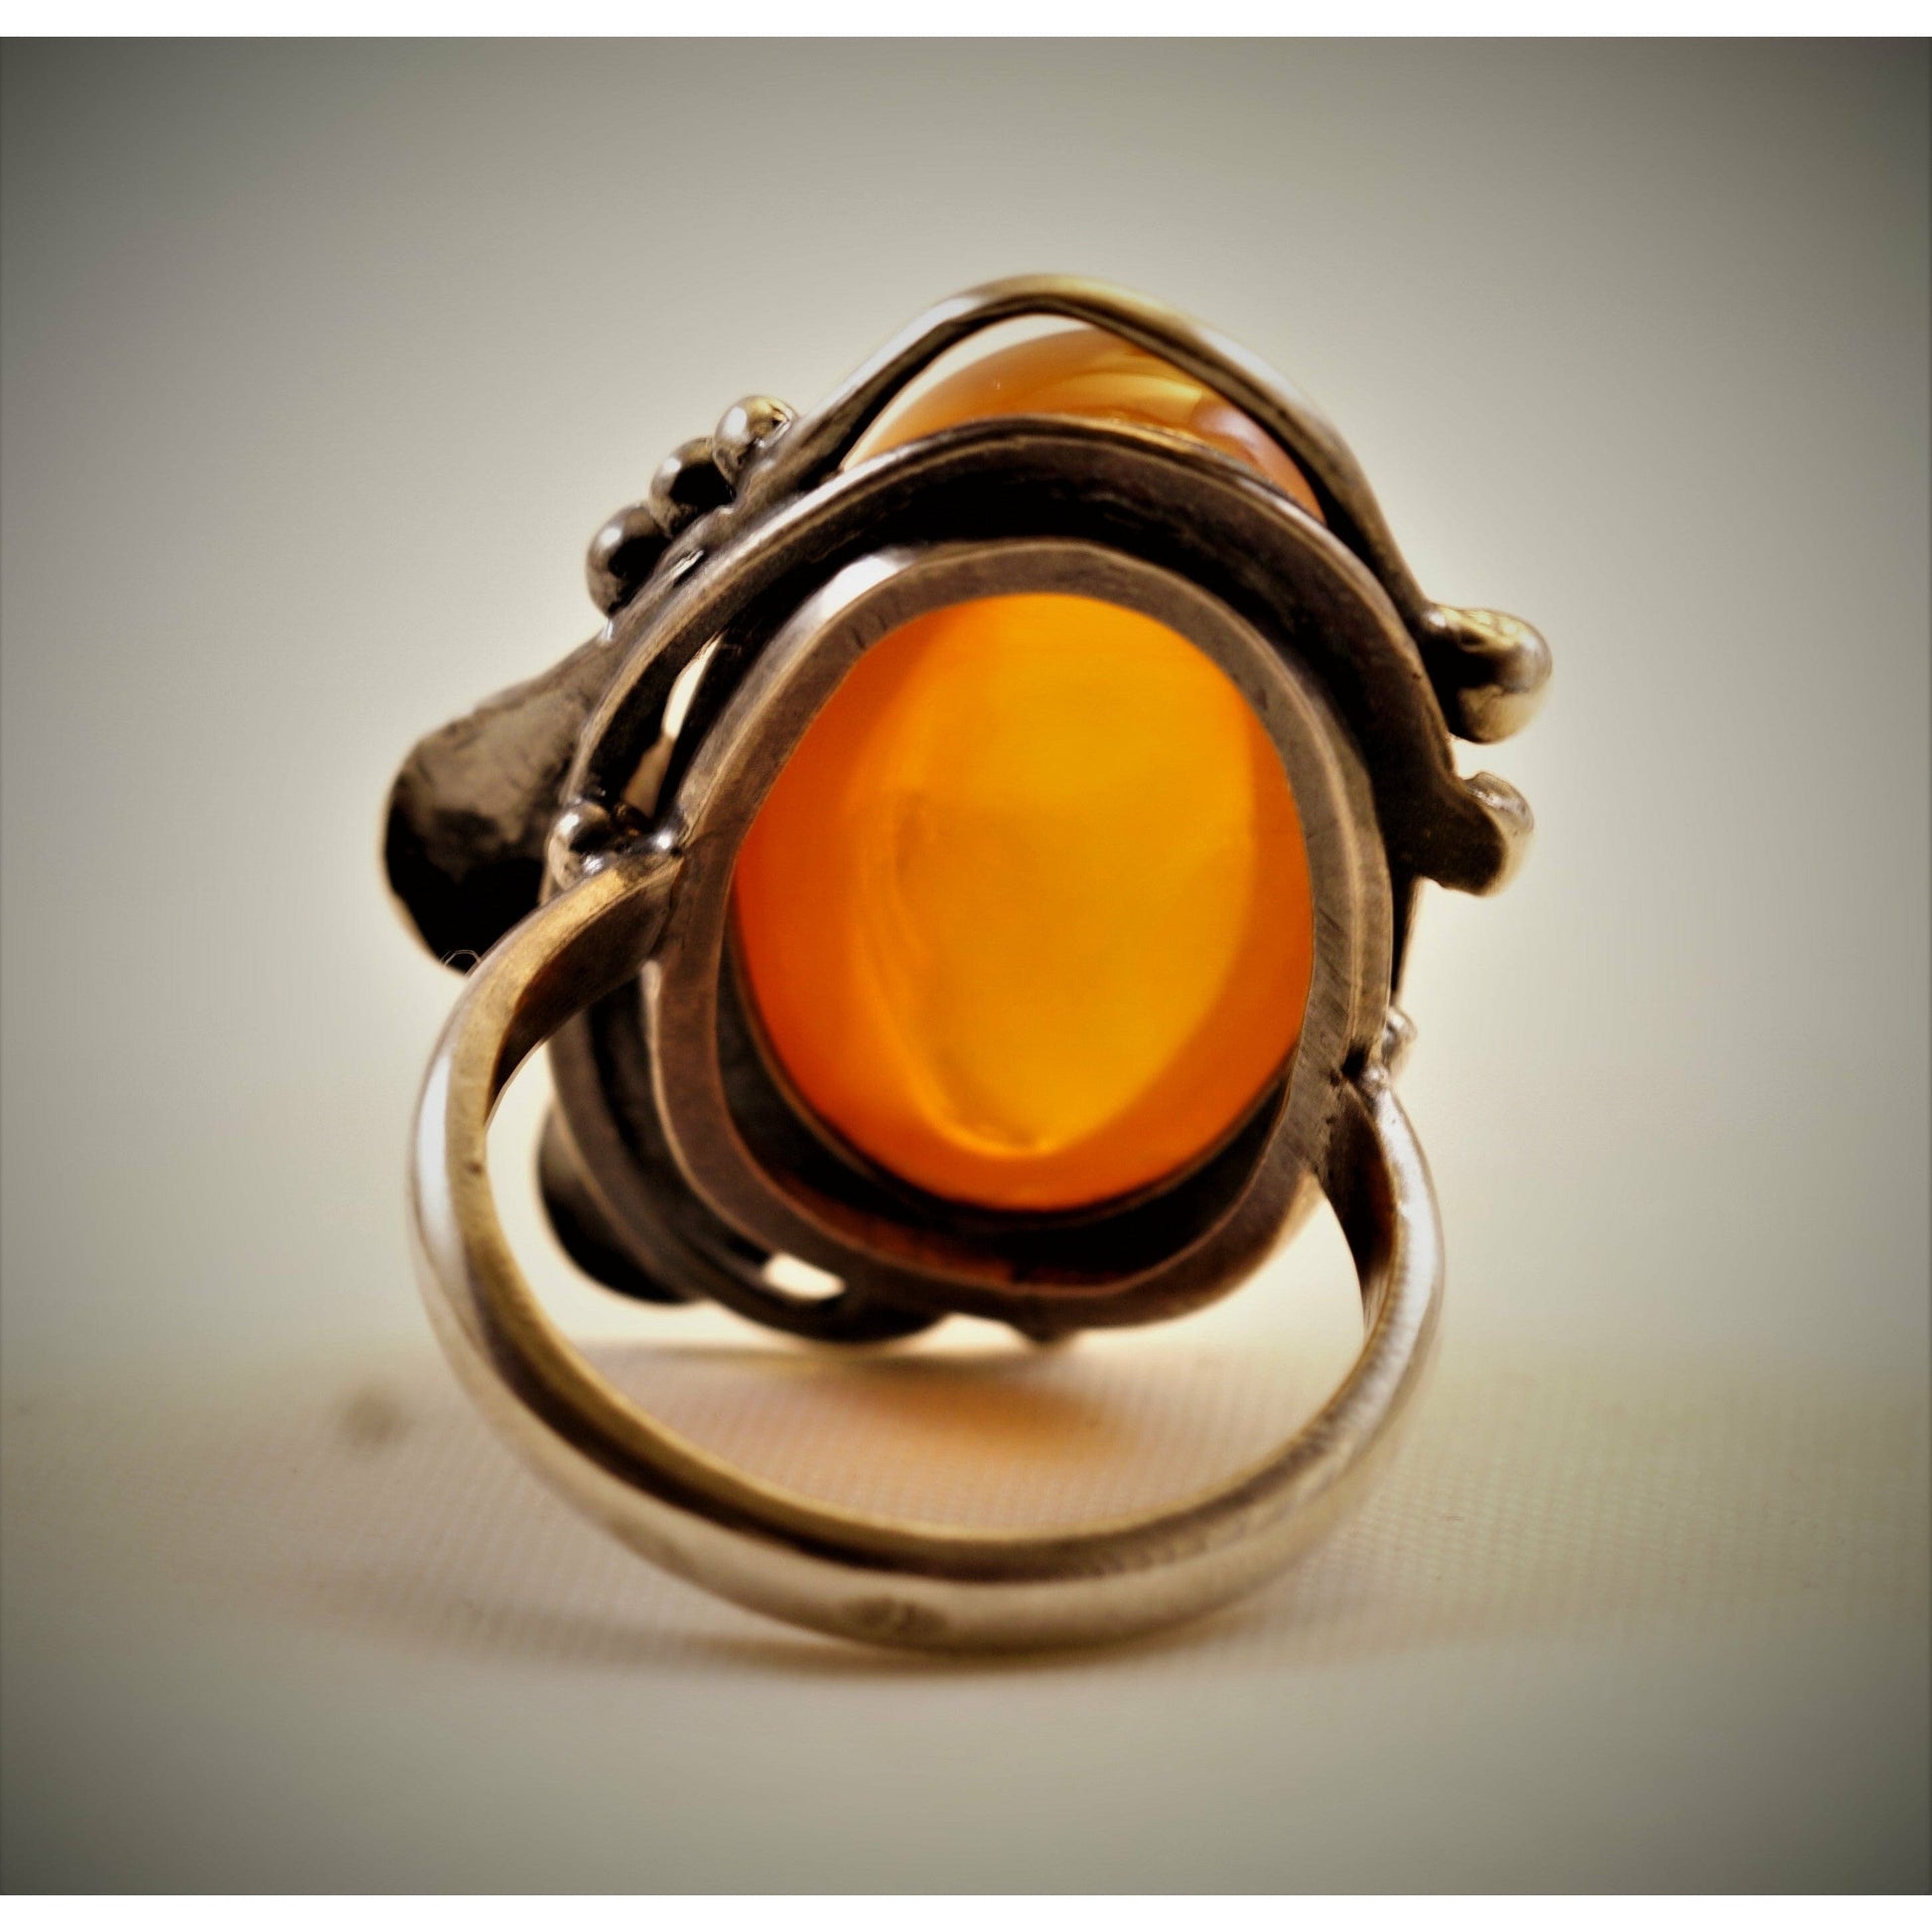 FJL Jewelry Sterling Silver Ring Sold_Amber Calla Lily Ring, Baltic Sea Amber in Sterling Silver Ring. Honey-Tone Amber Lily Ring